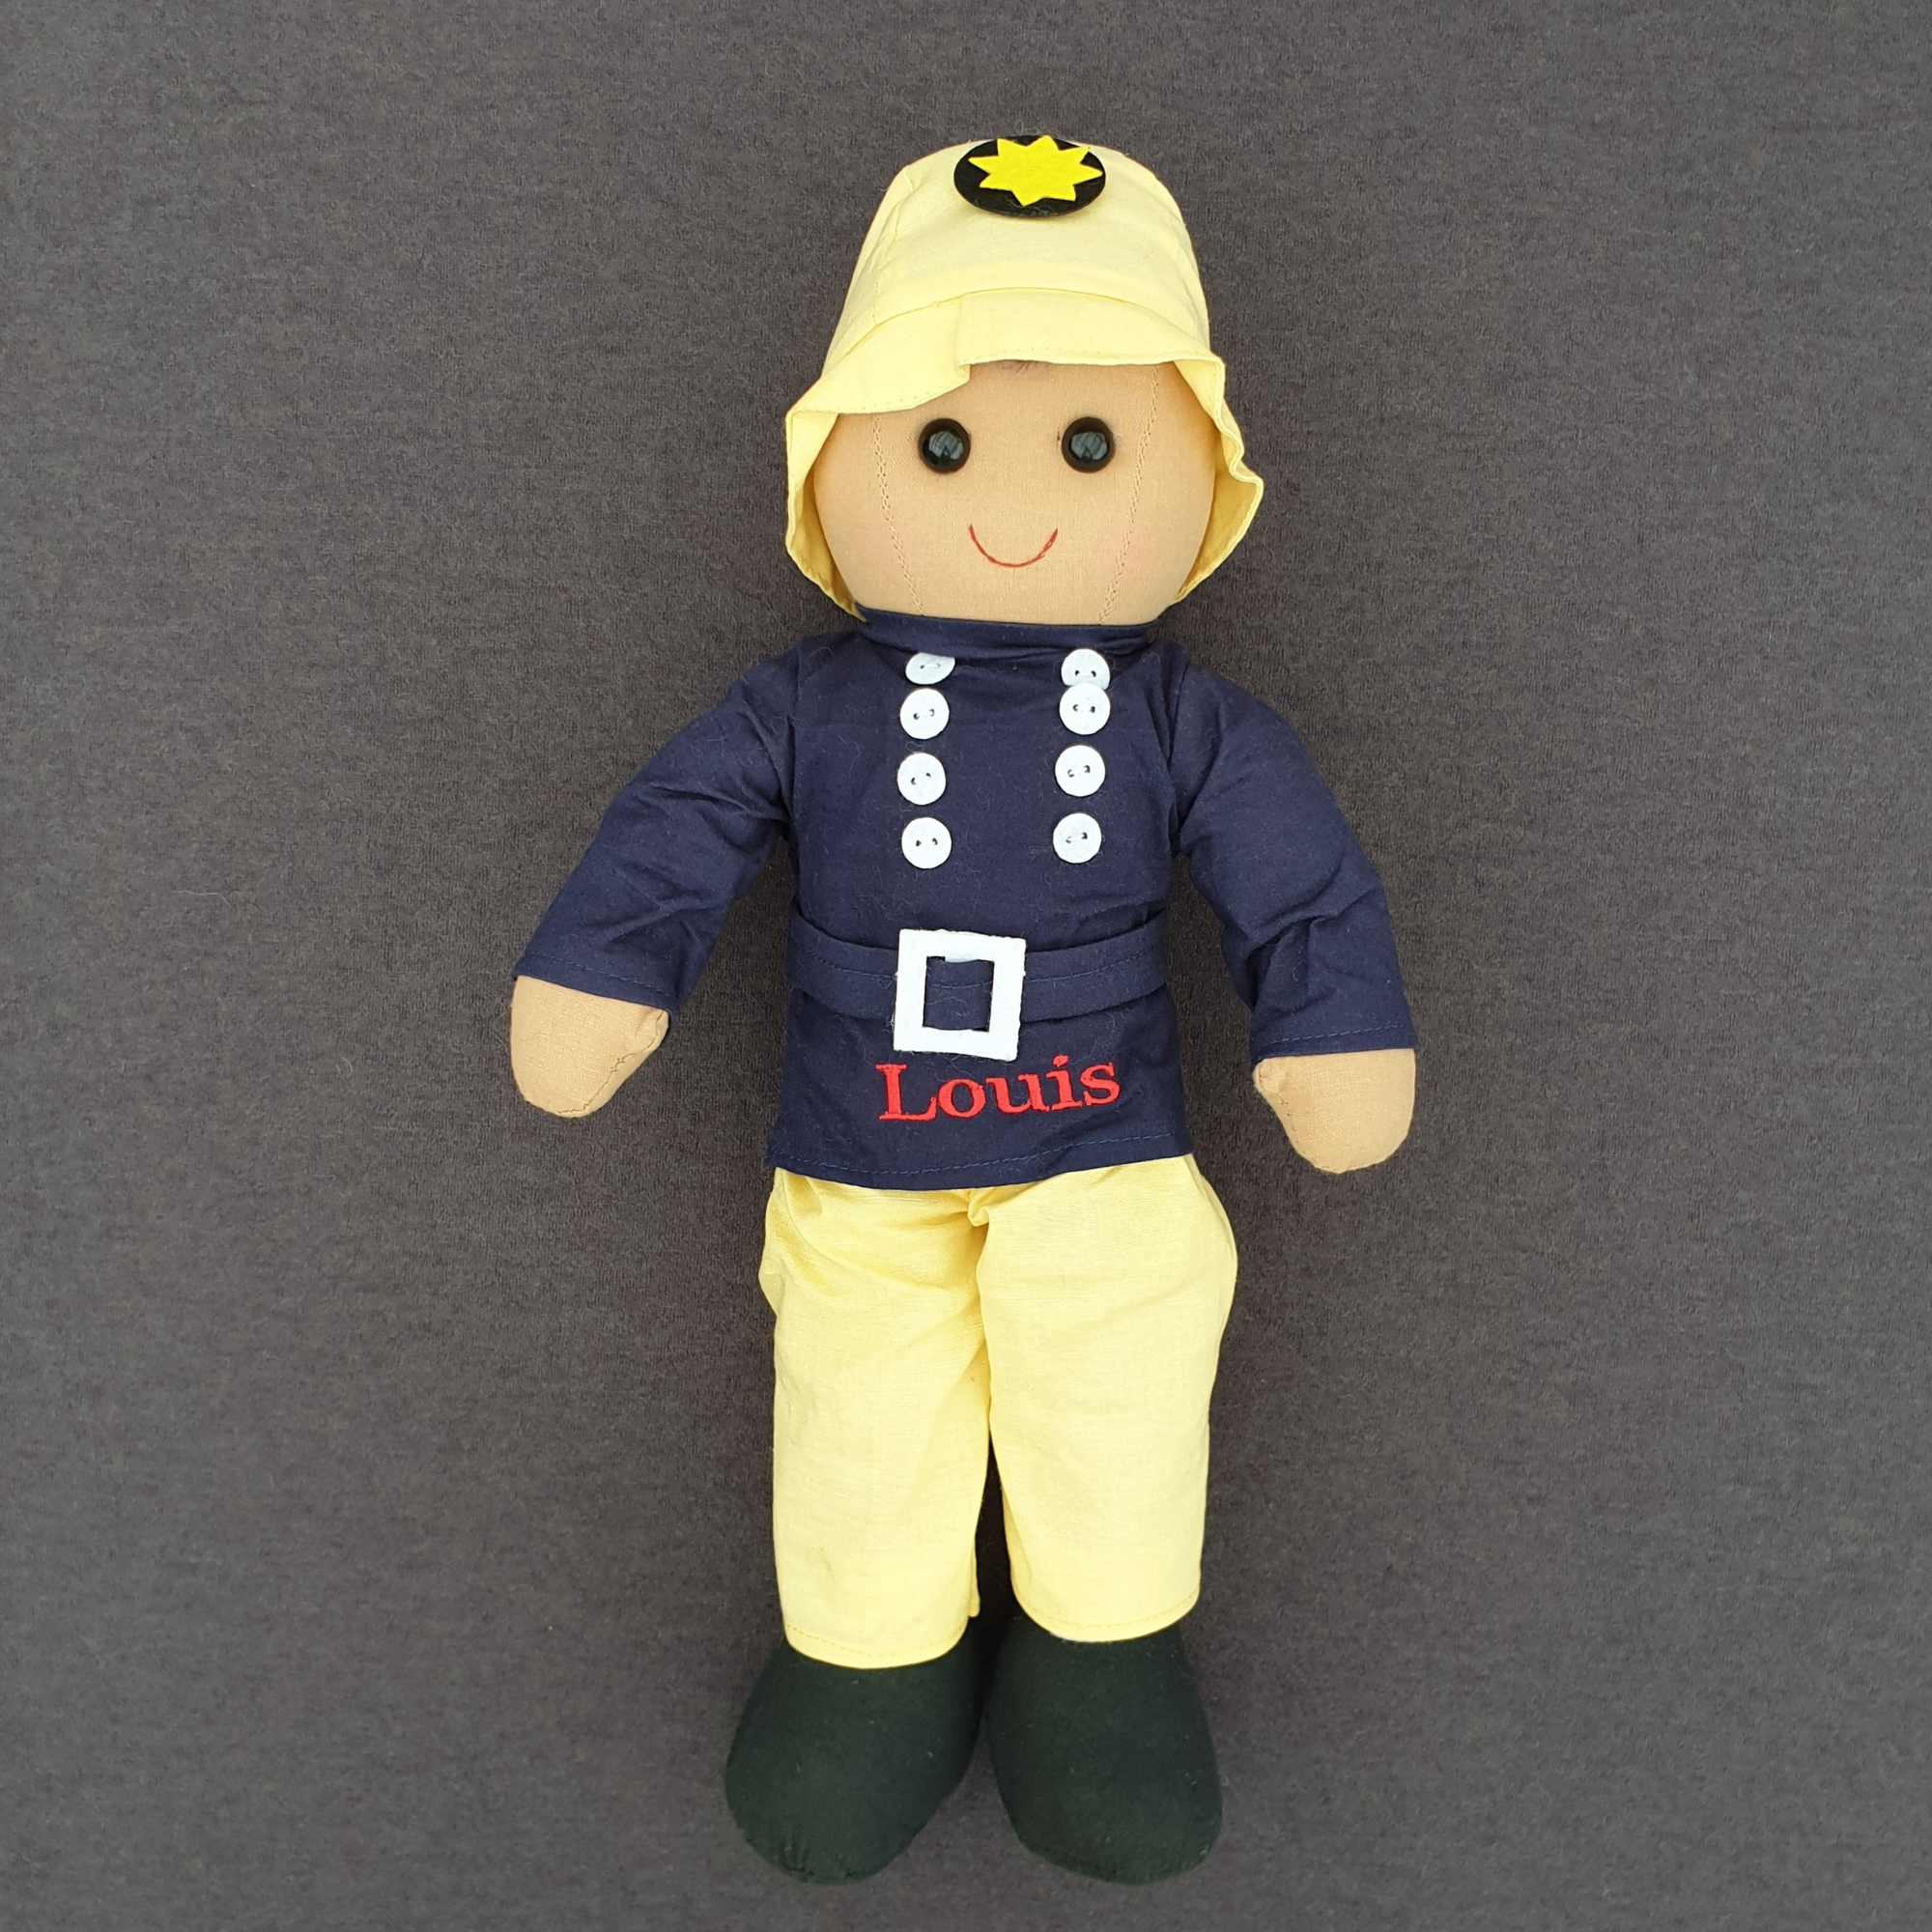 Personalised fireman ragdoll. The doll is wearing yellow trousers and a yellow hat along with a navy blue tunic with a belt and white buttons. The doll is made from cotton and measures approximately 40 cm in height.